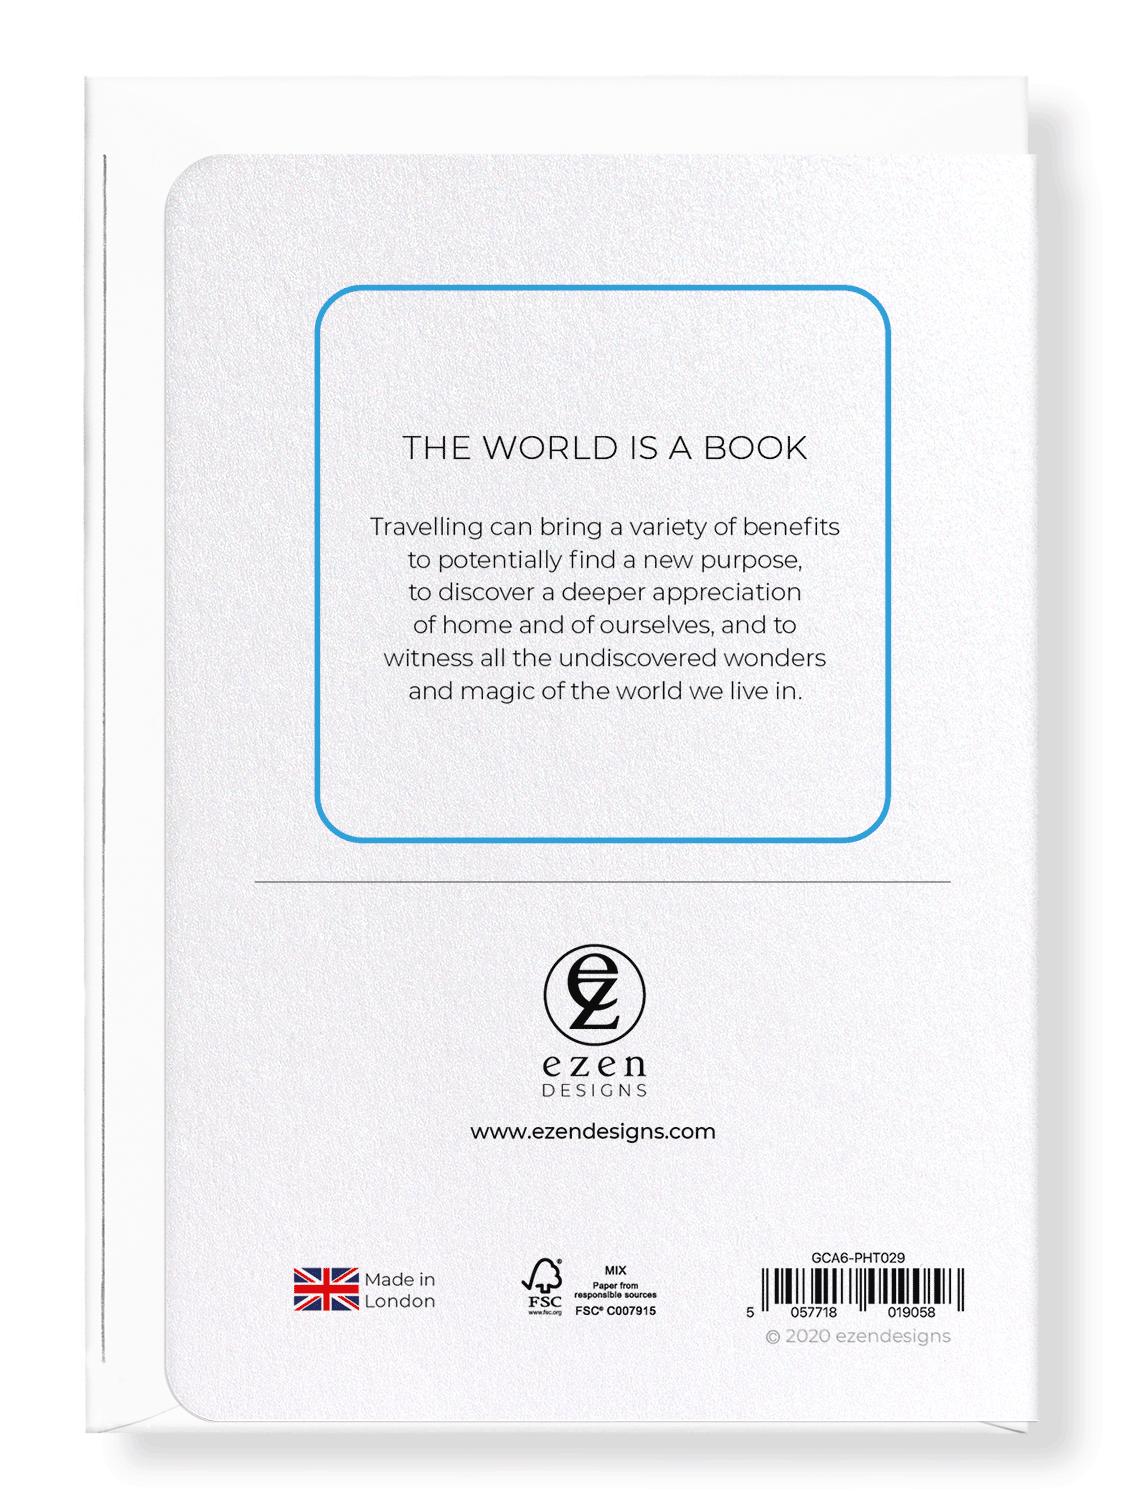 Ezen Designs - The world is a book - Greeting Card - Back